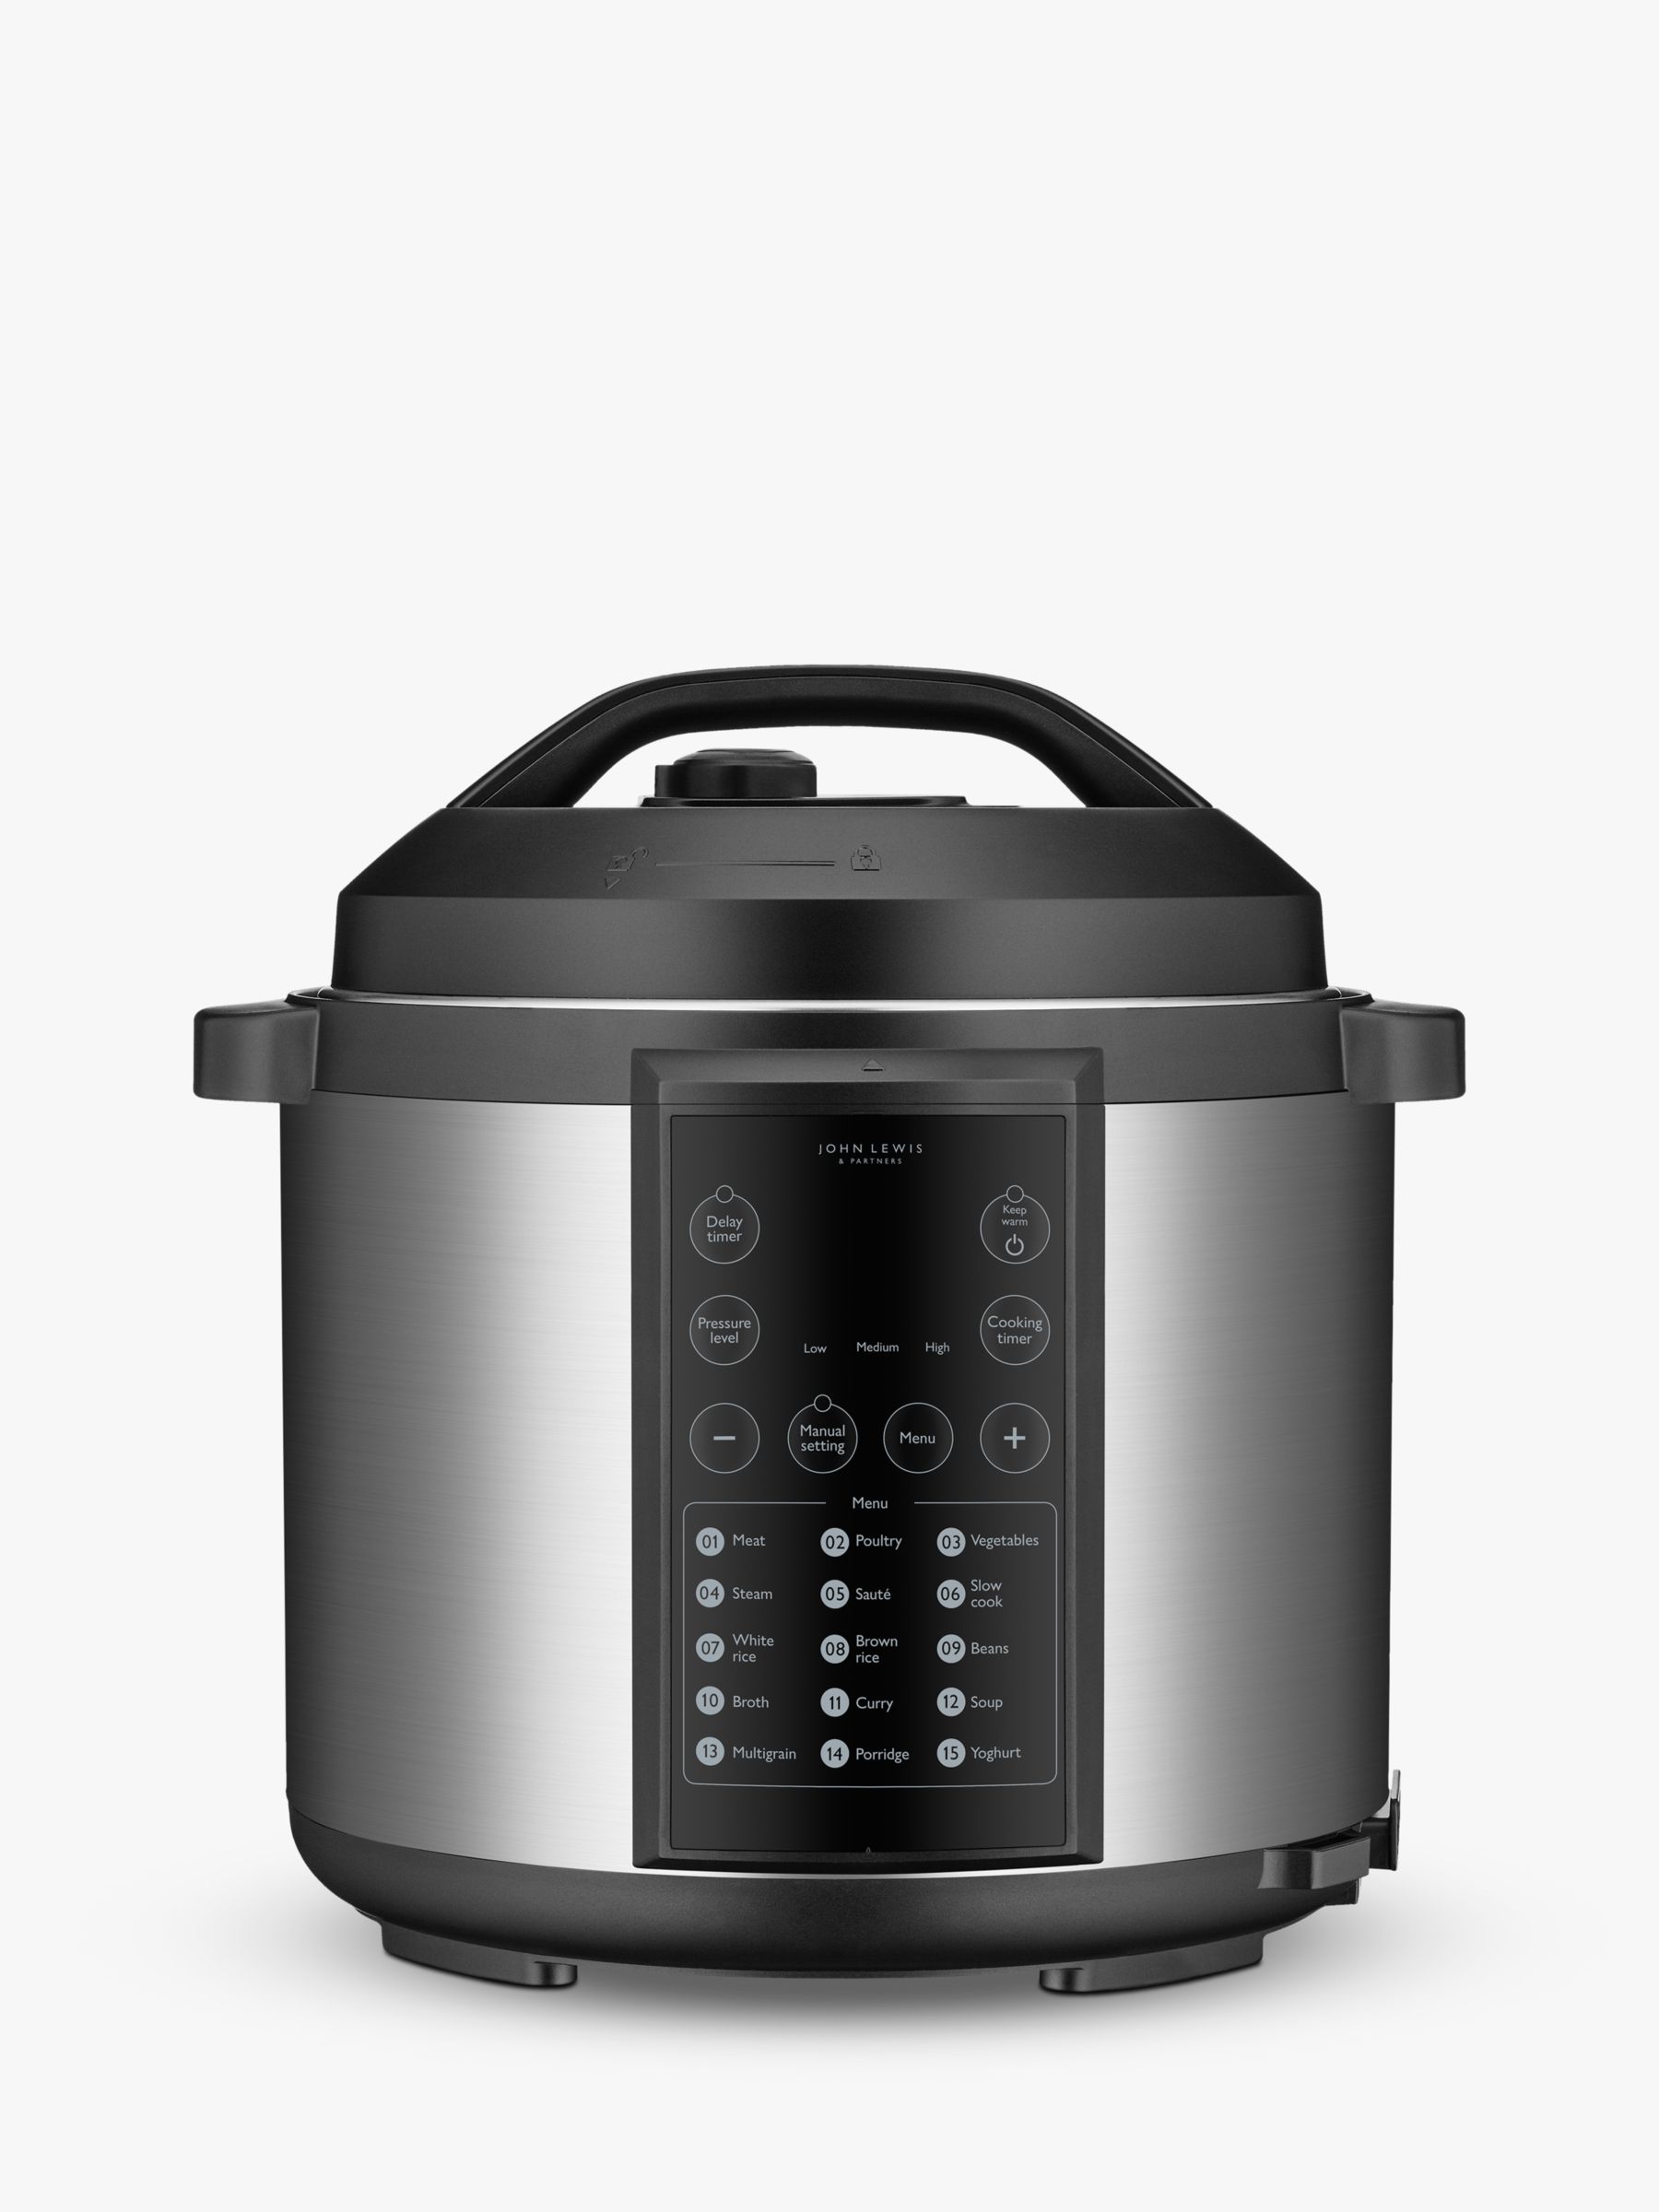 Stovetop Pressure Cooker Portable Multifunction 5.5L Capacity